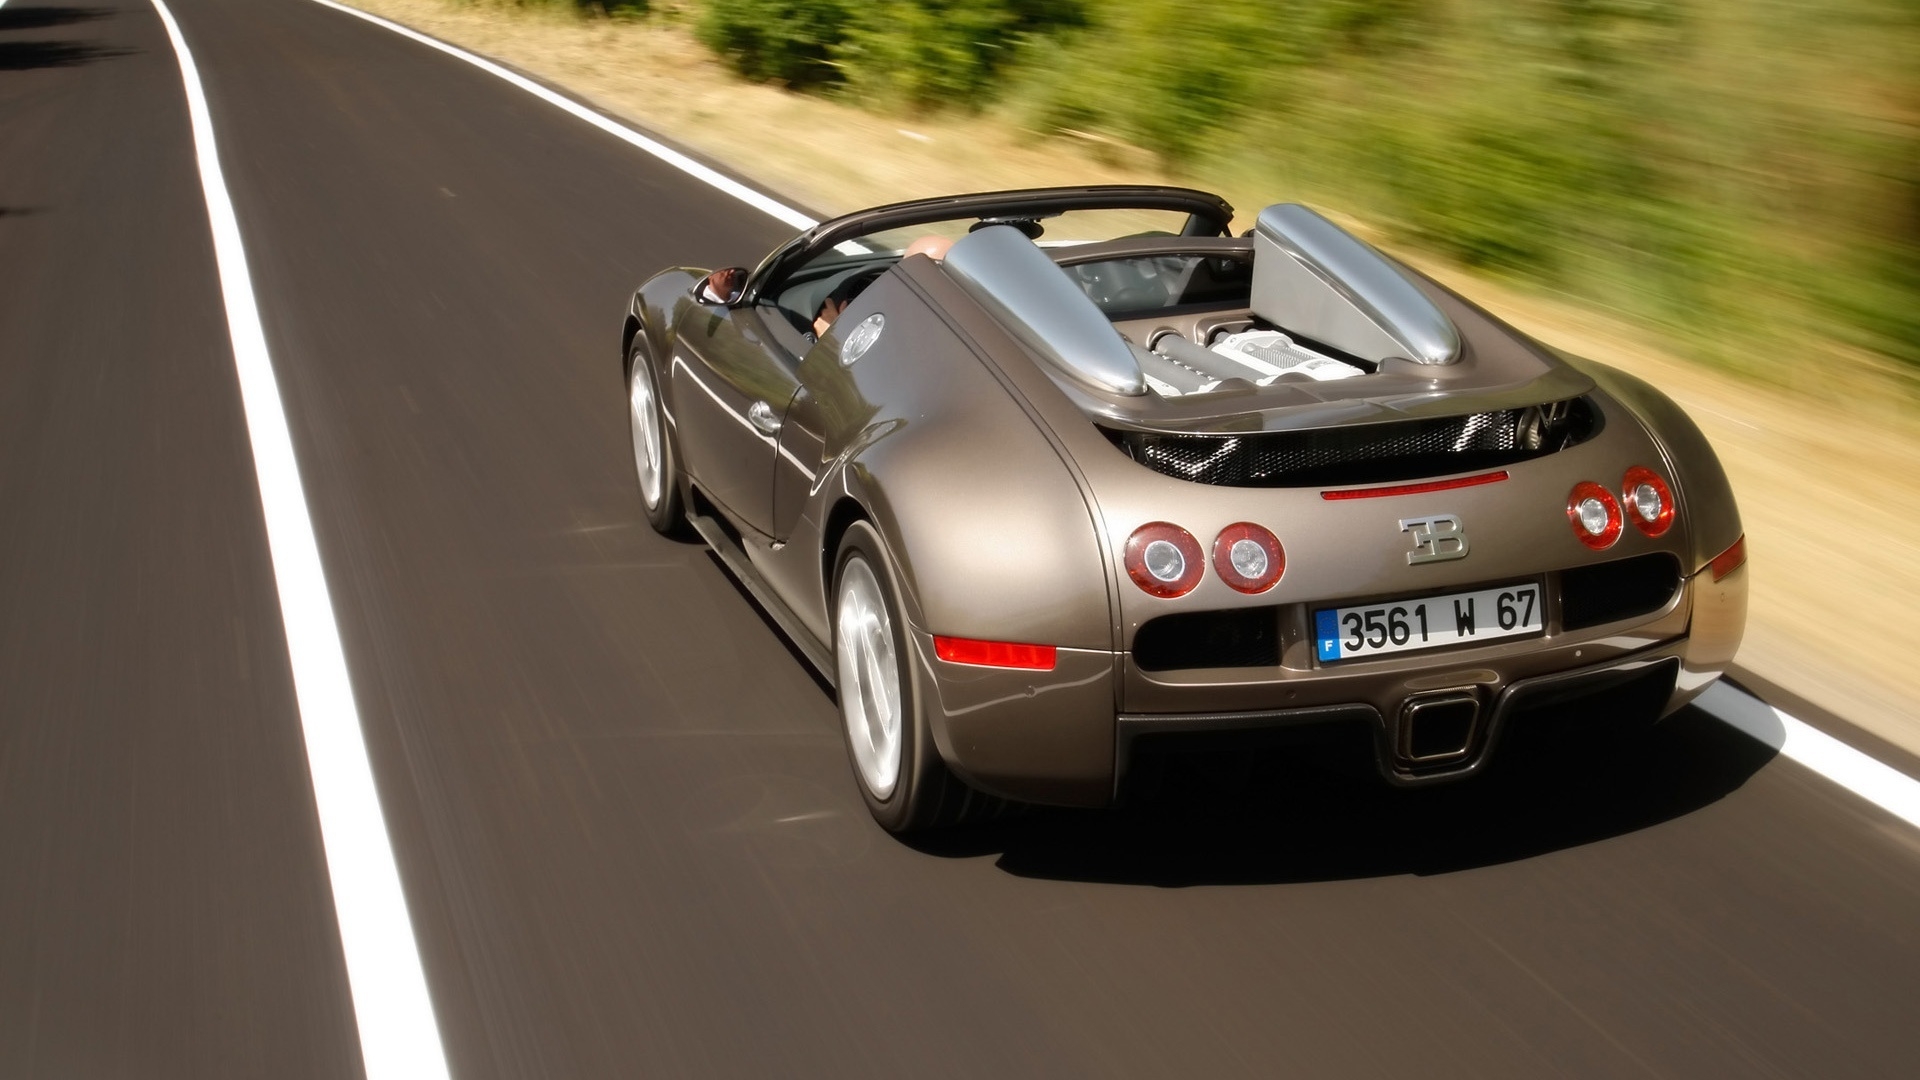 Bugatti Veyron 16.4 Grand Sport 2010 in Rome - Rear Angle Speed Top for 1920 x 1080 HDTV 1080p resolution